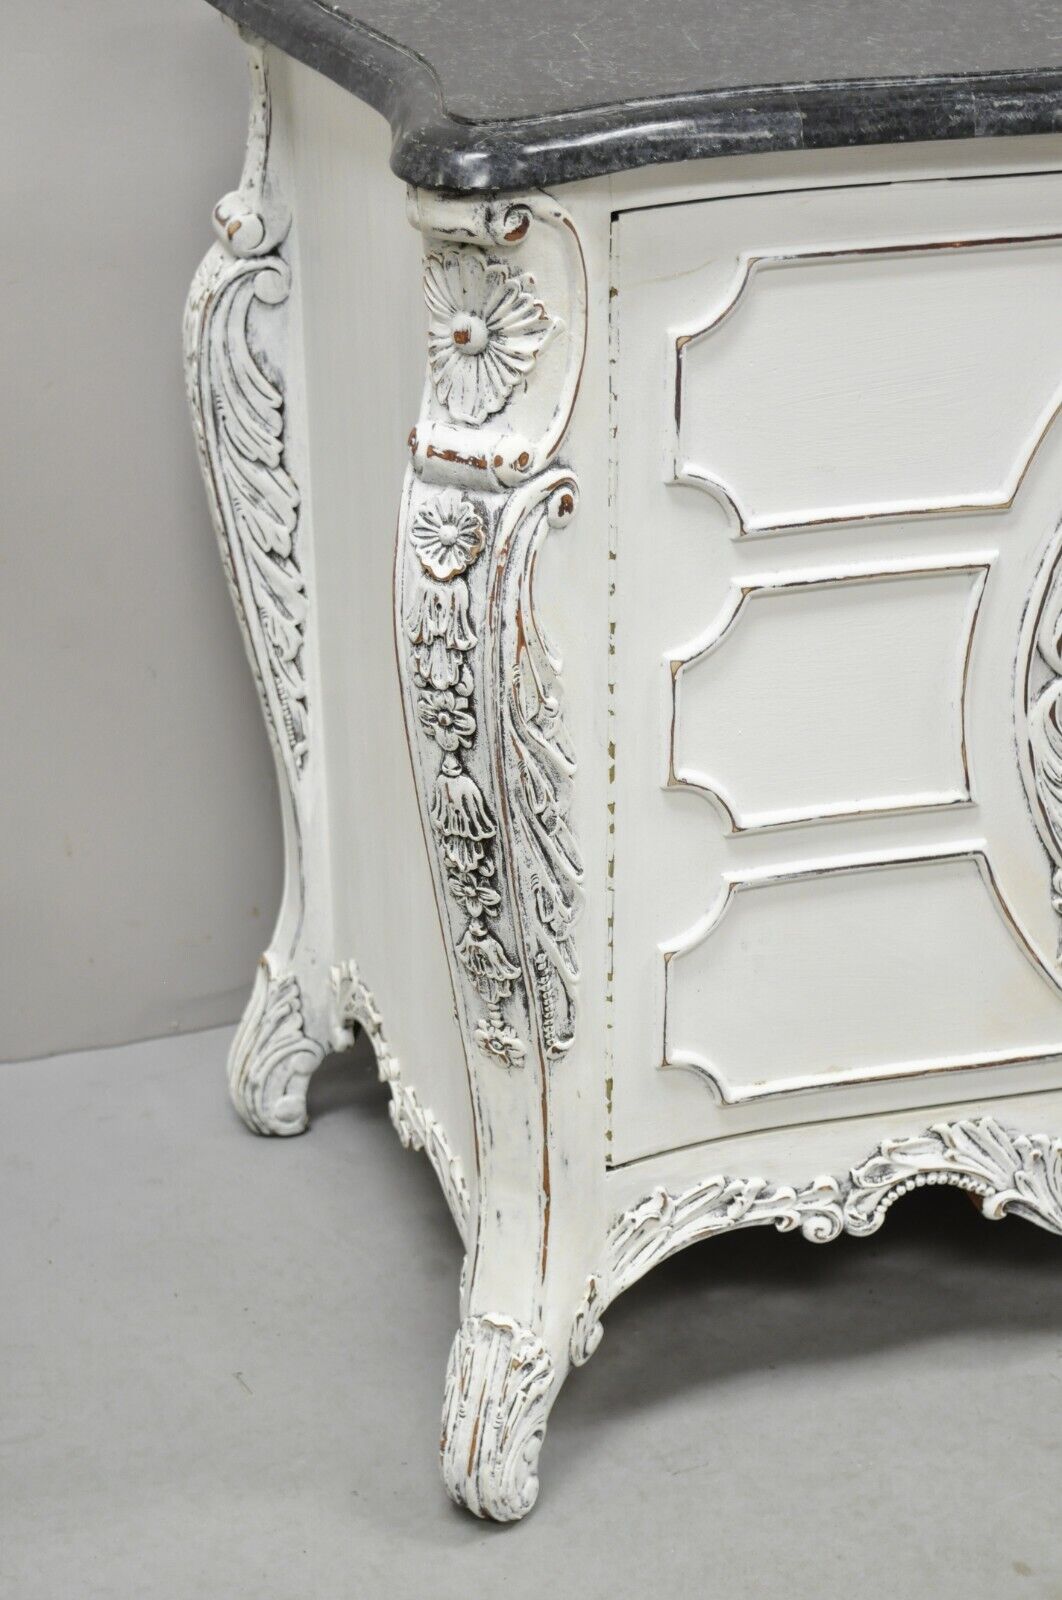 Reproduction French Louis XV Style Marble Top Commode Sideboard Buffet Cabinet